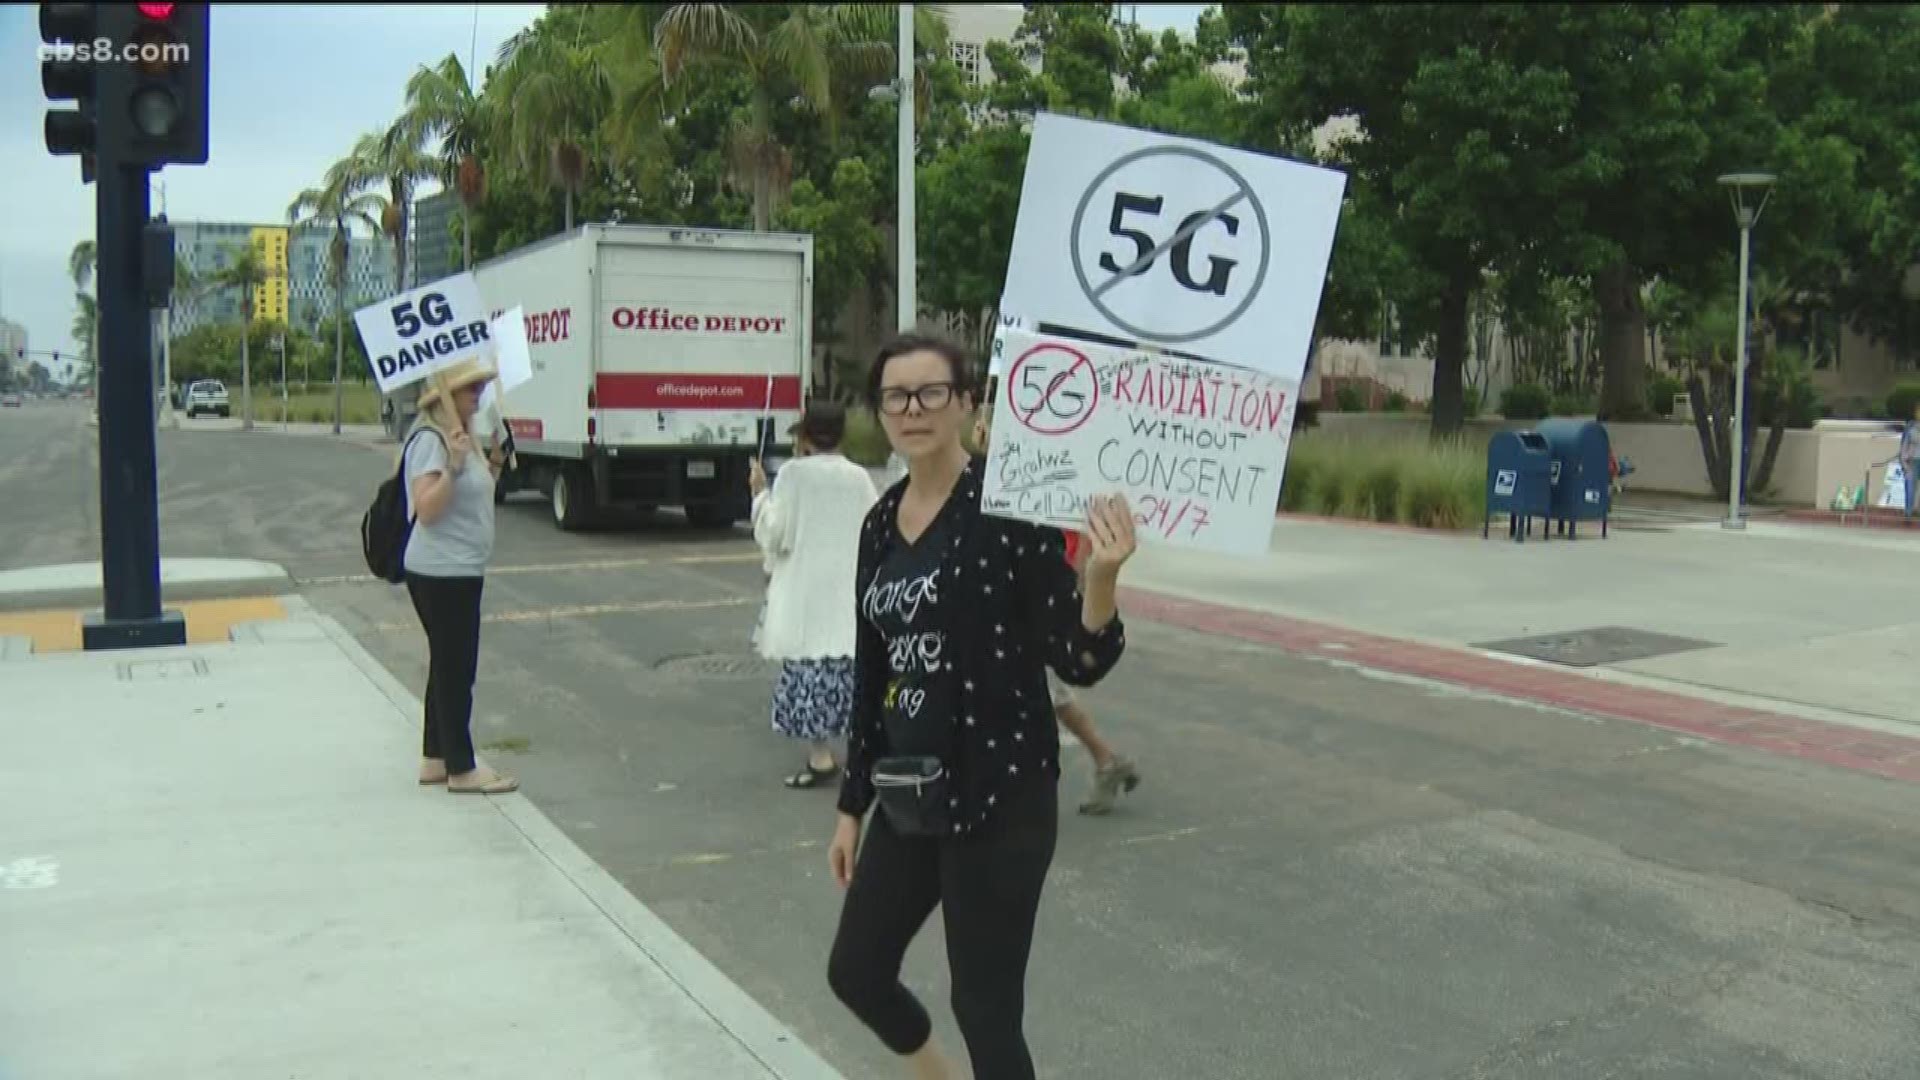 The rally was held against the County of San Diego’s proposed ordinances to facilitate 4G and 5G small cells for unincorporated areas of the county.